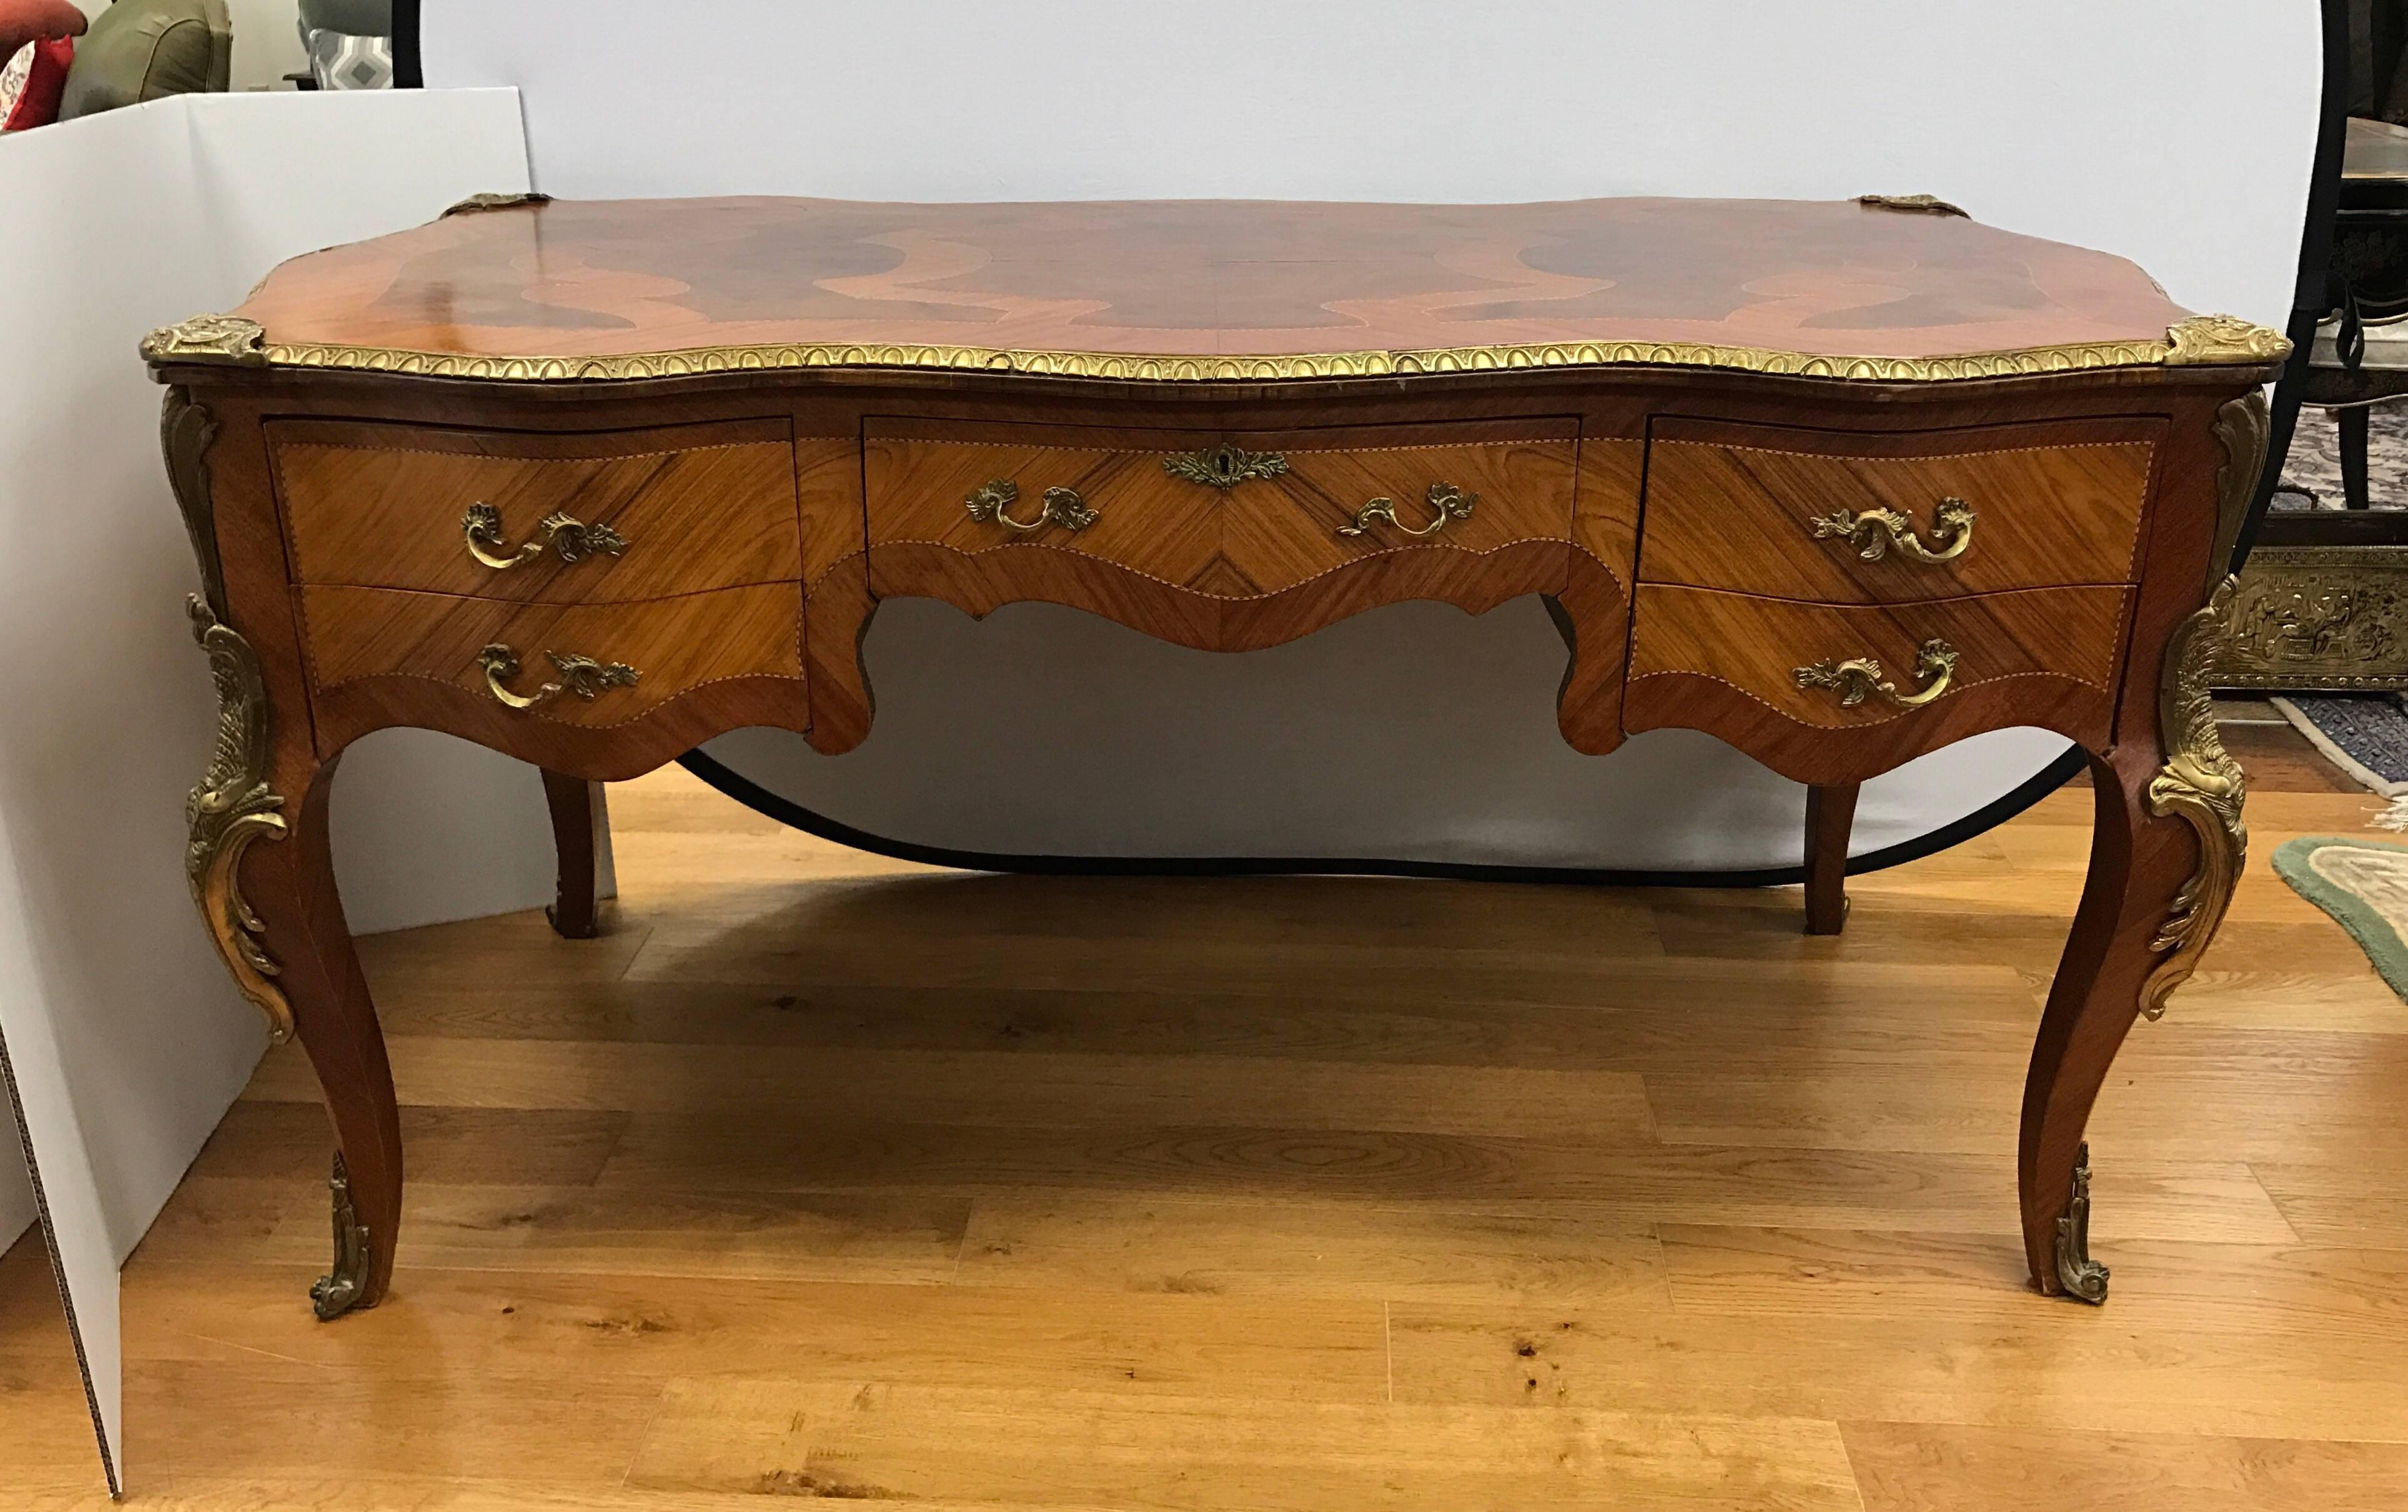 19th century French Louis XV writing desk or bureau plat with ormolu mounts and kingwood parquetry. Features a gorgeous parquetry design on desk top.